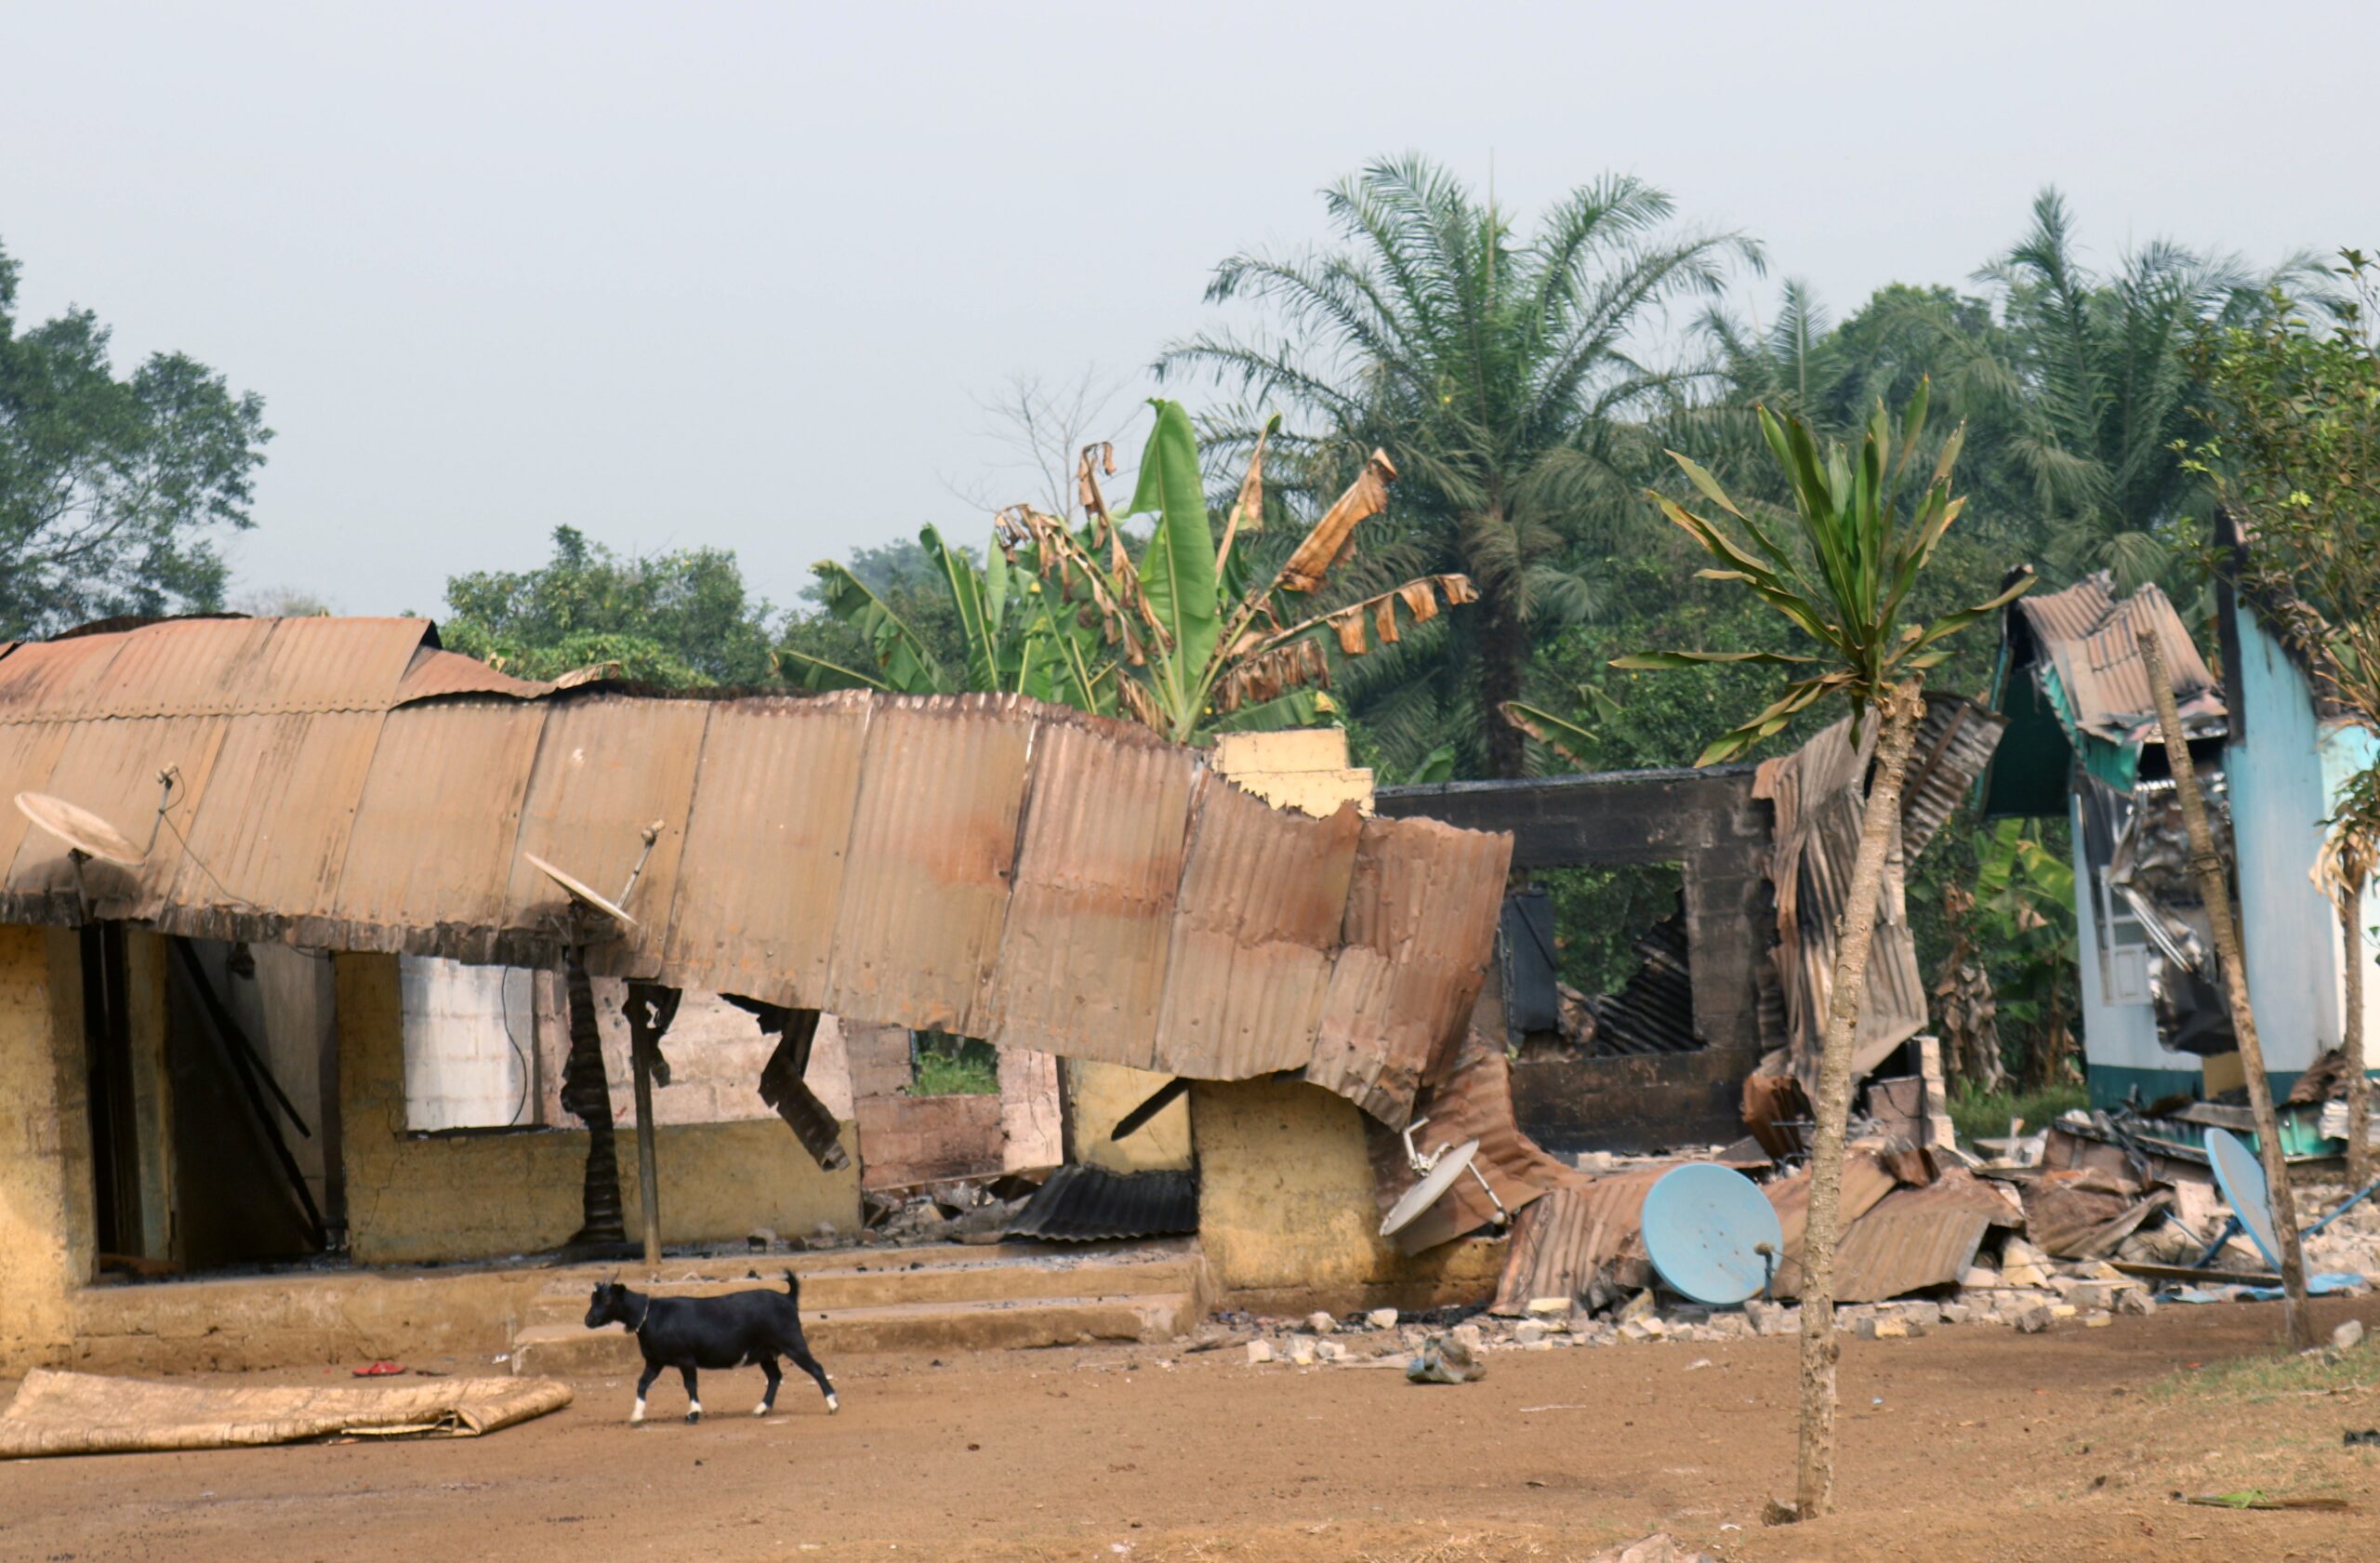 A file photo shows burned and damaged buildings in Kembong, Cameroon. A Catholic priest and three Catholic teachers in Cameroon's troubled southwest region were recovering from bullet wounds after they were shot in what church authorities say was a targeted attack on a Catholic primary school in Kembong Sept. 26, 2023. The attack comes amid seven years of a separatist conflict in the African country. (OSV News photo/Josiane Chemou, Reuters)